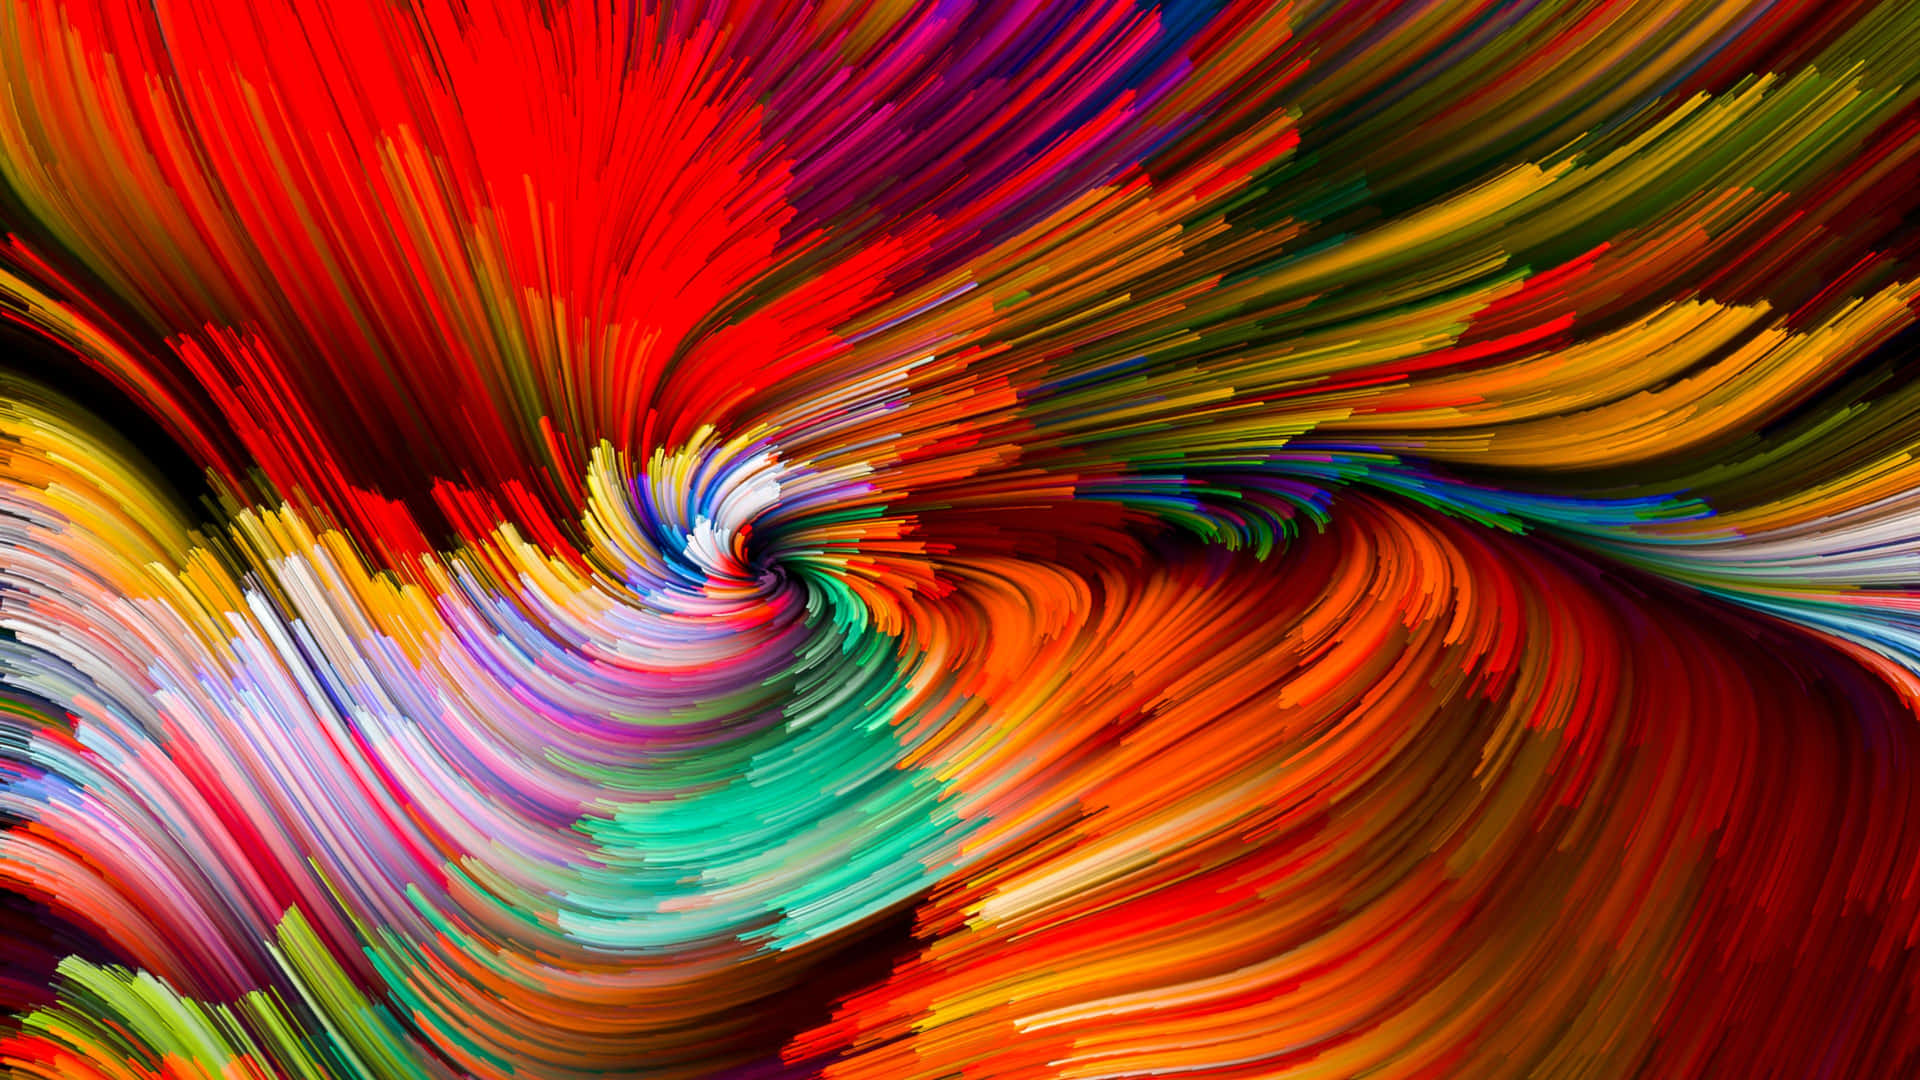 Download Abstract Colorful Swirls Of Paint Wallpaper | Wallpapers.com